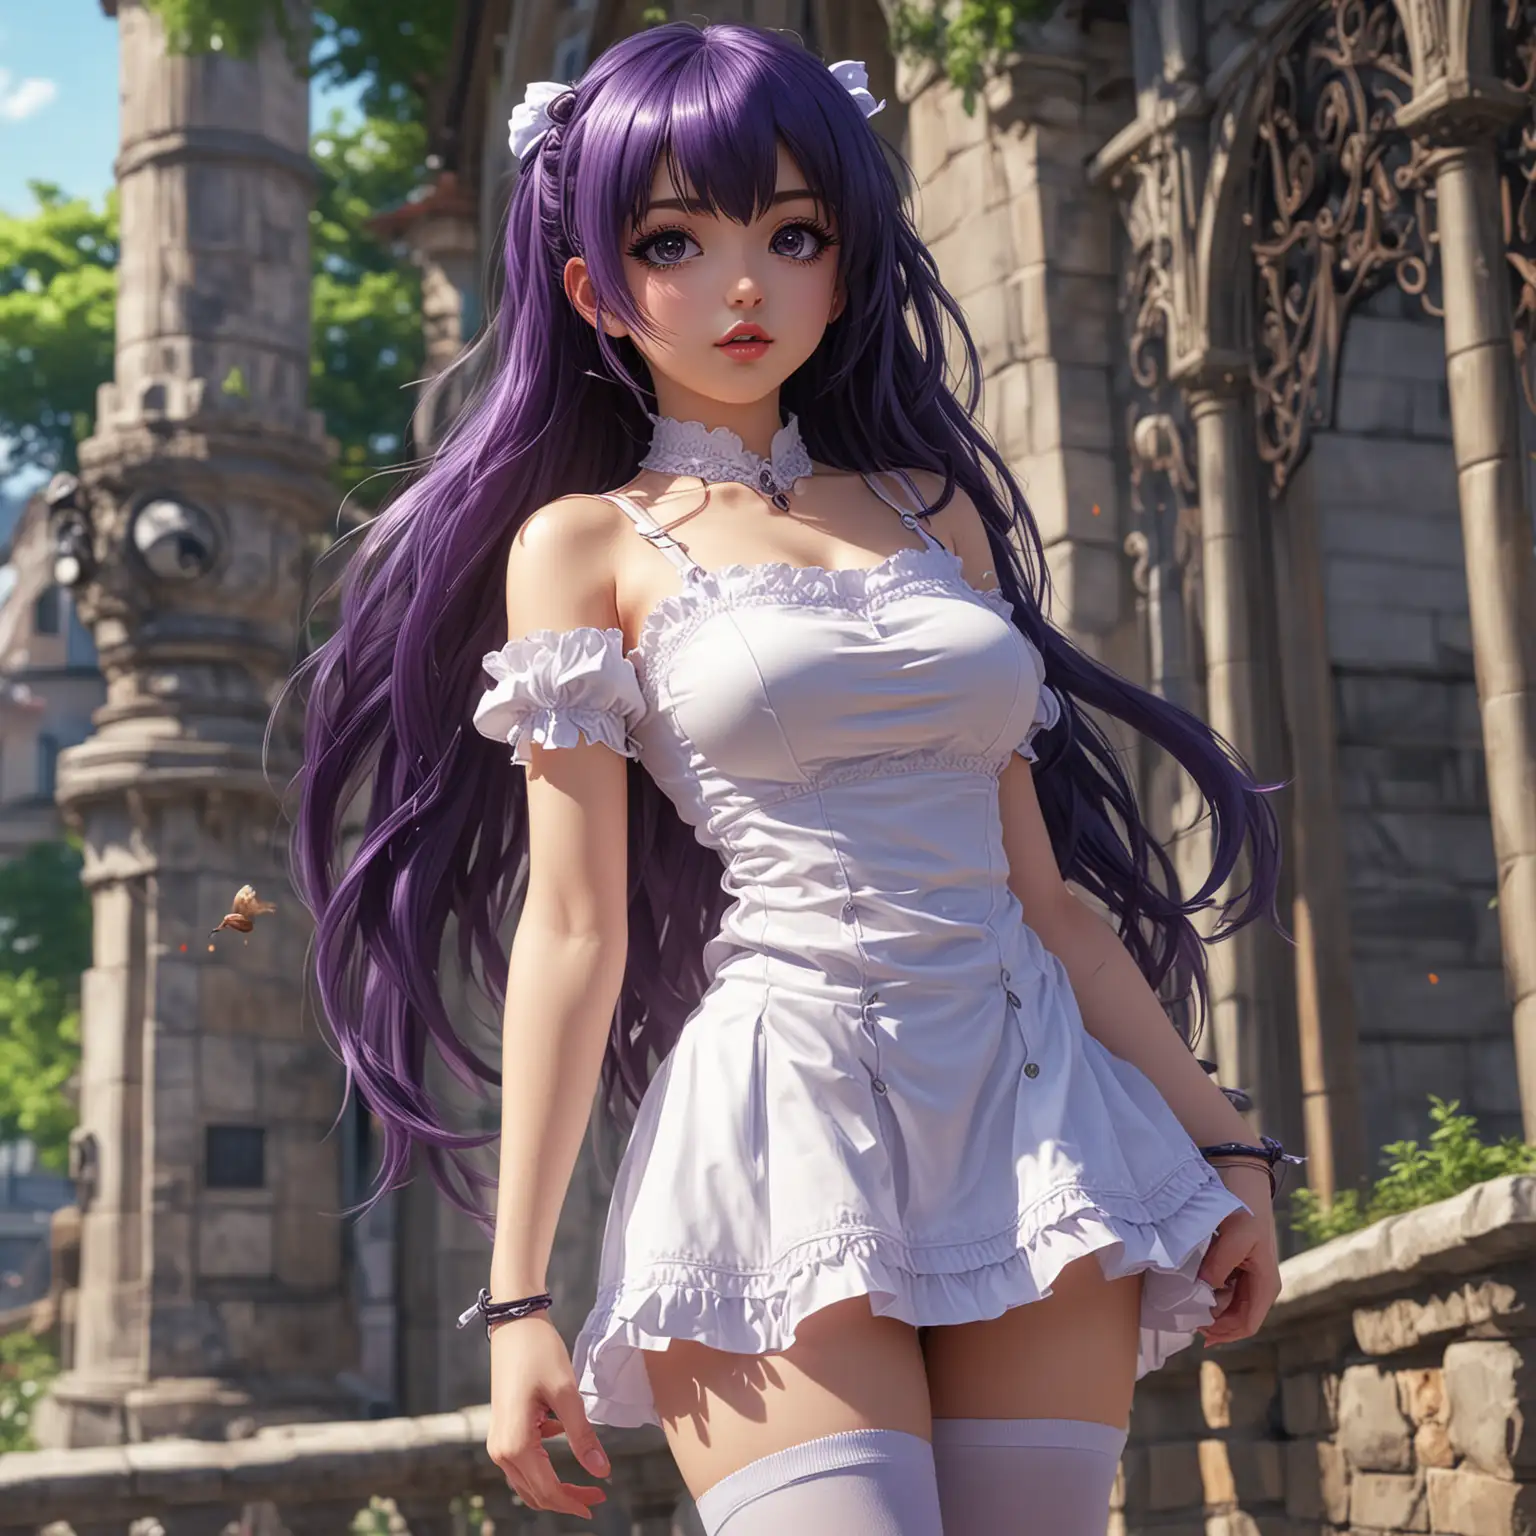 Beautiful Anime Girl in White Summer Minidress and Thigh Highs